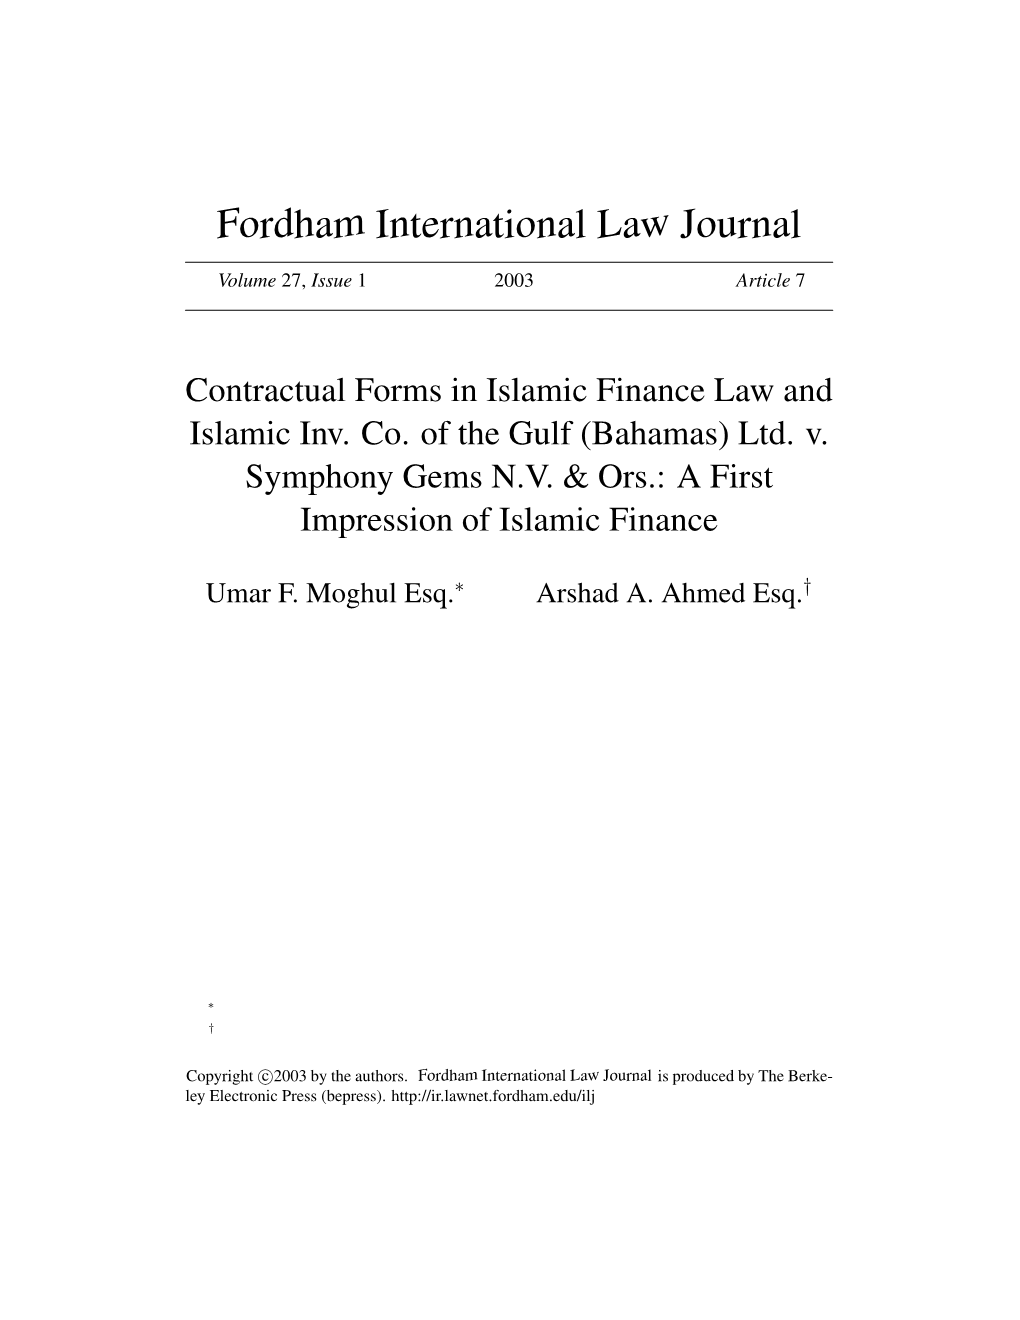 Contractual Forms in Islamic Finance Law and Islamic Inv. Co. of the Gulf (Bahamas) Ltd